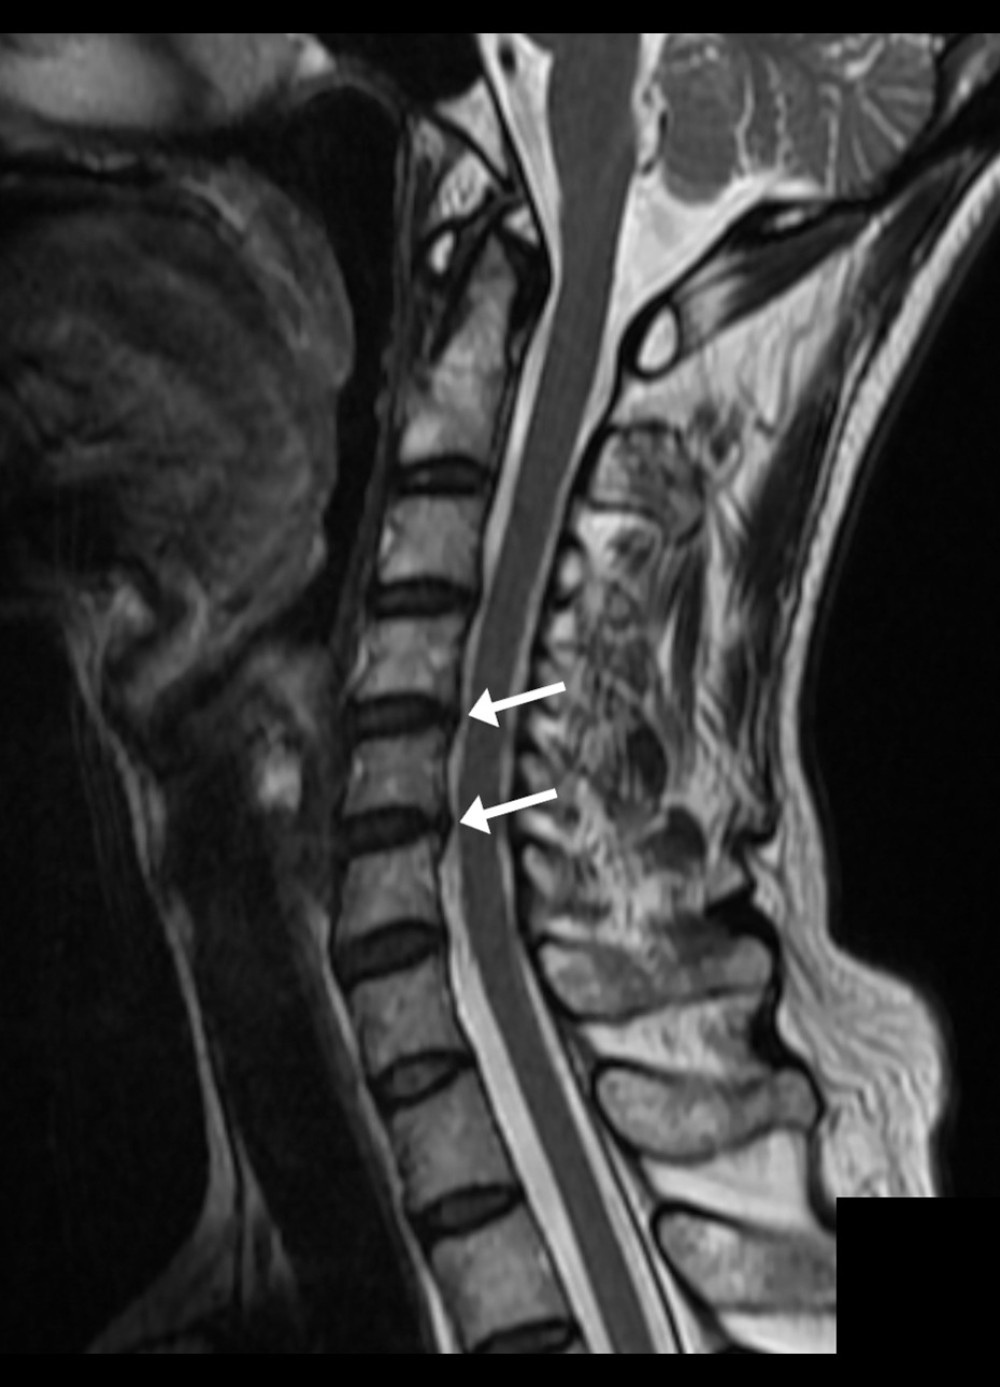 Cervical spine magnetic resonance imaging showing mild degenerative changes. This mid-sagittal T2-weighted sequence shows mild disc protrusions at C4/5 and C5/6 (arrows) causing mild cervical canal stenosis without cervical cord compression.